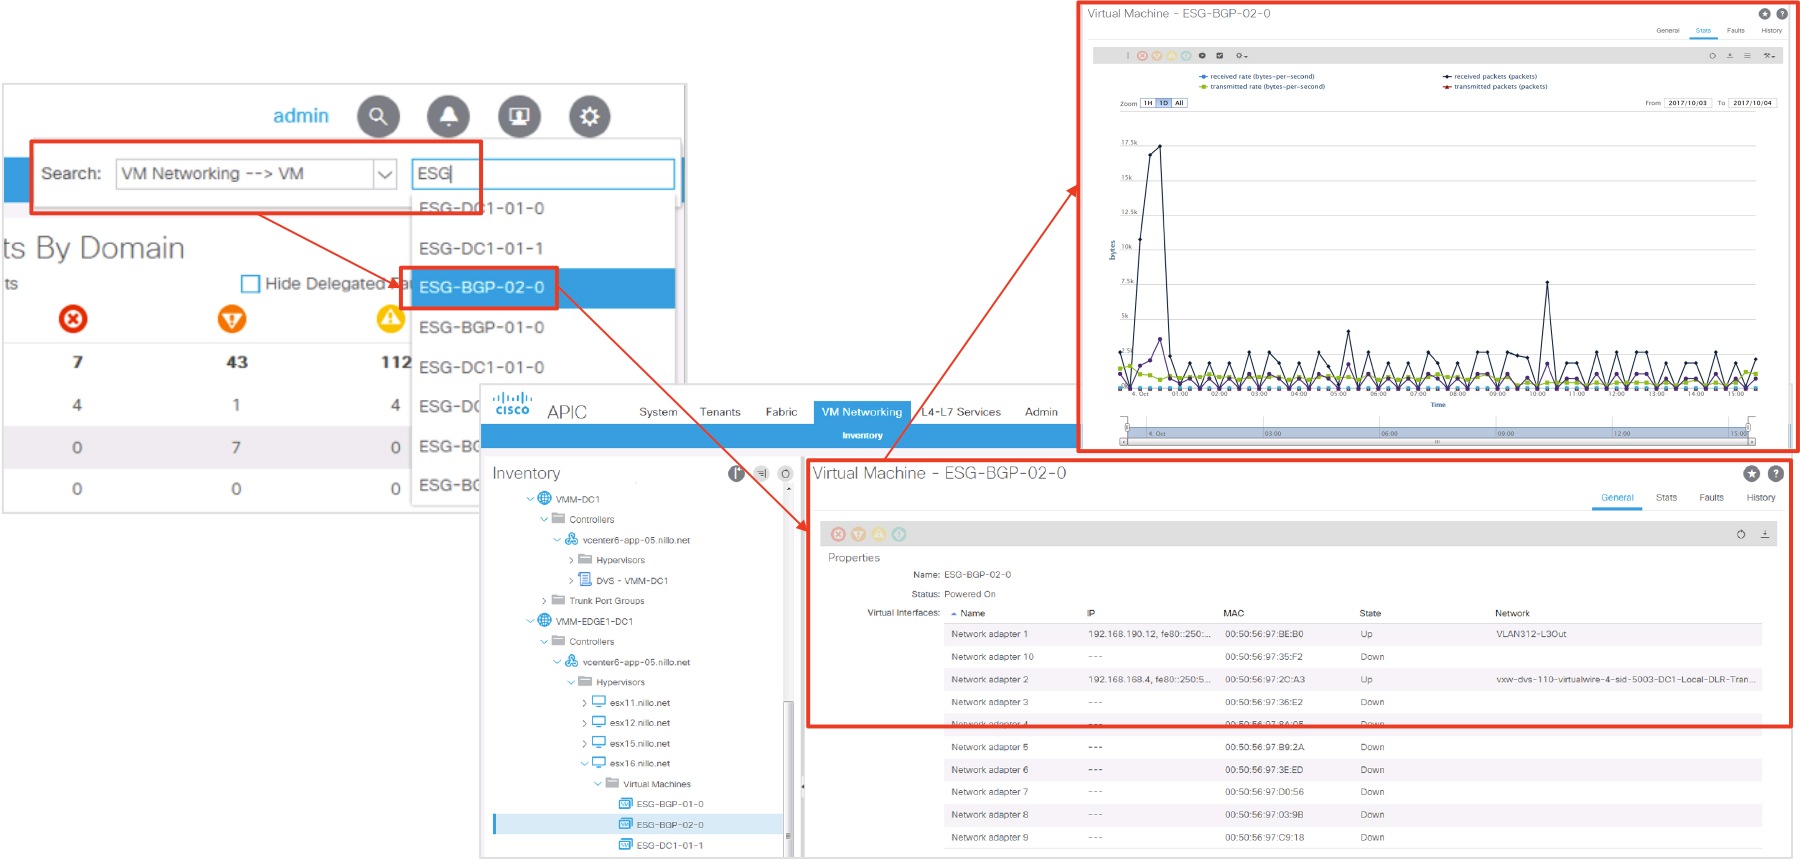 The VMM domain allows the fabric administrator greater visibility and simplifies troubleshooting workflows, in this display showing details of an edge node VM and its reported traffic